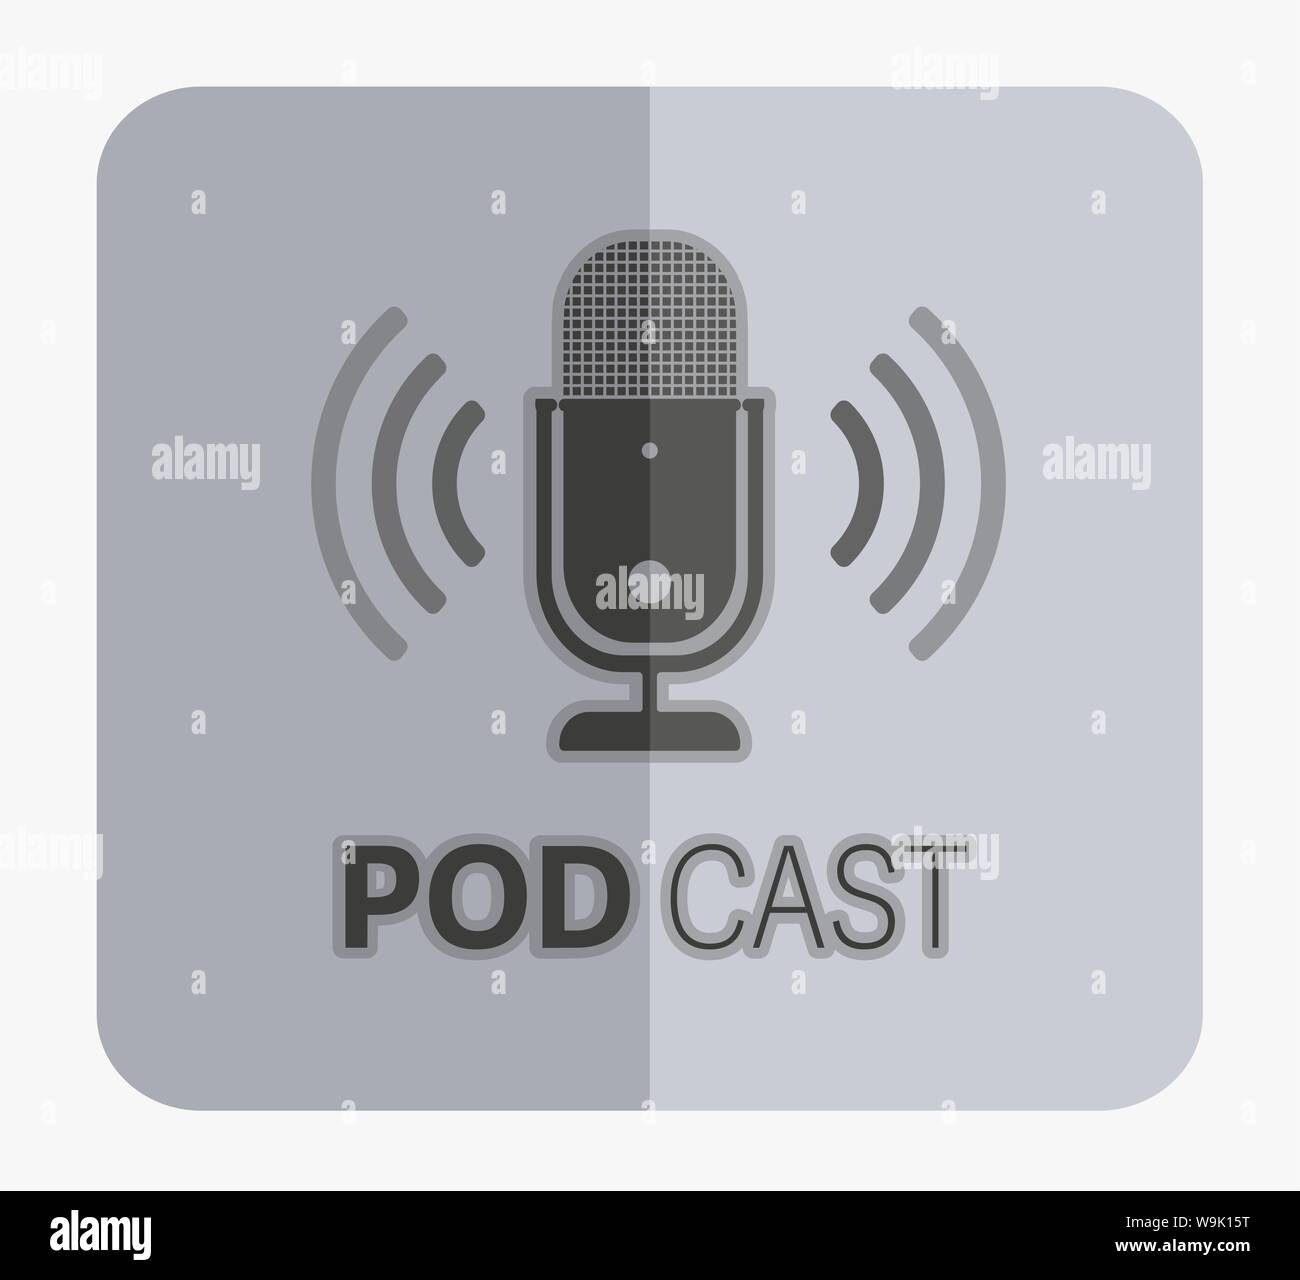 podcast icon or logo with microphone, podcasting concept vector illustration Stock Vector